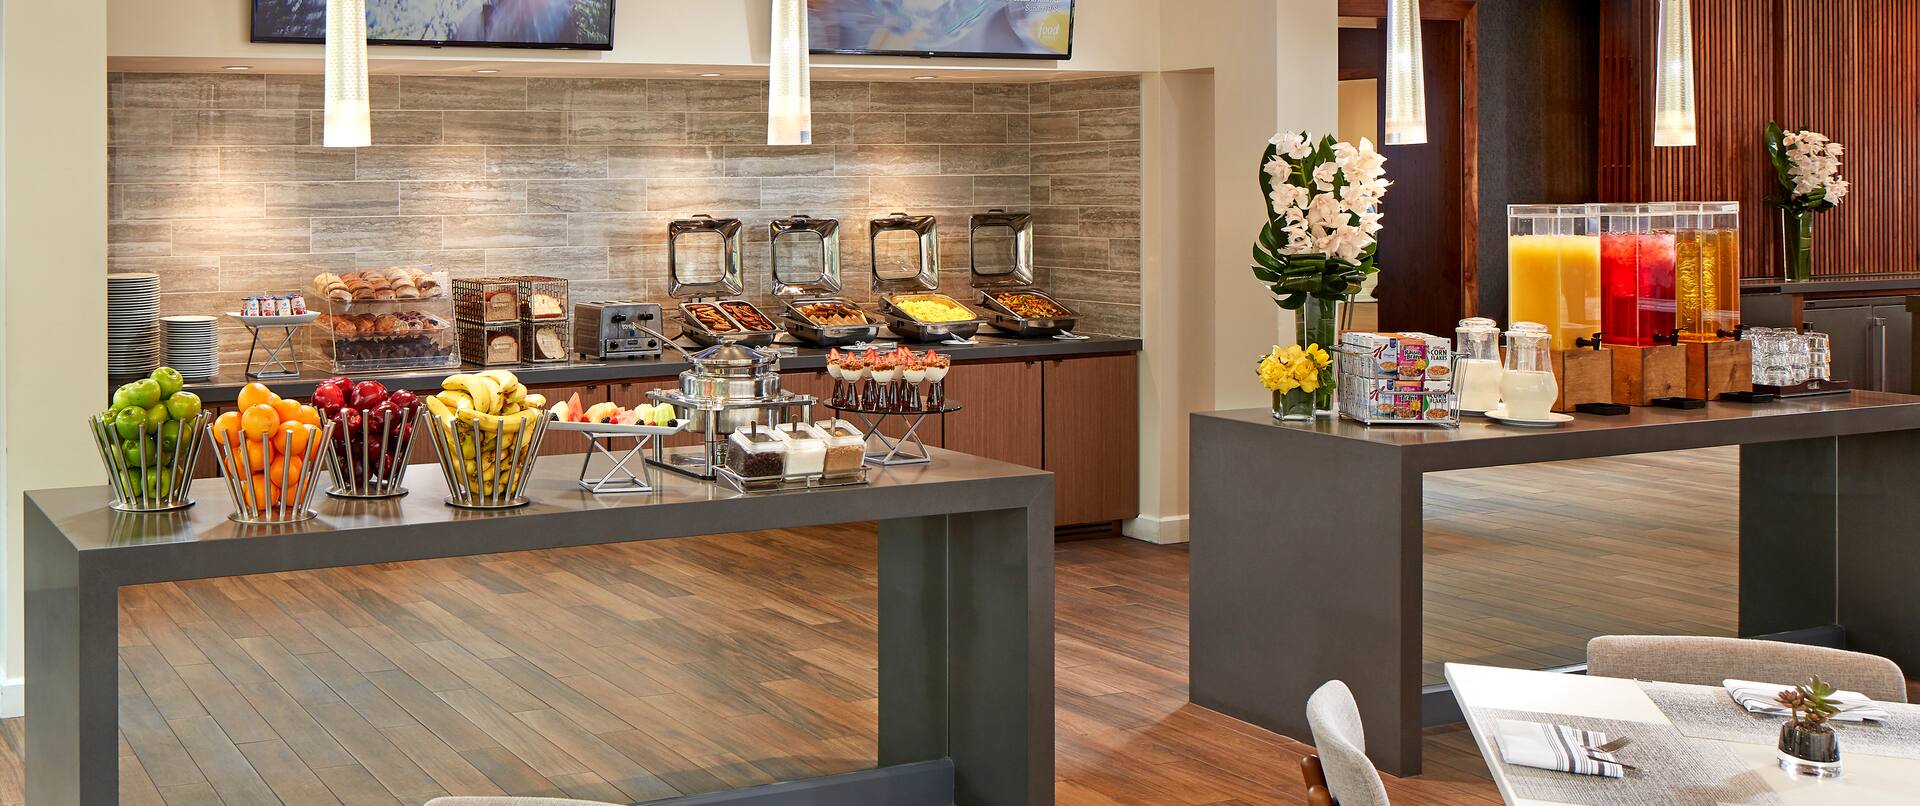 Breakfast Buffet Area with Tables and Counters with Food and Drinks